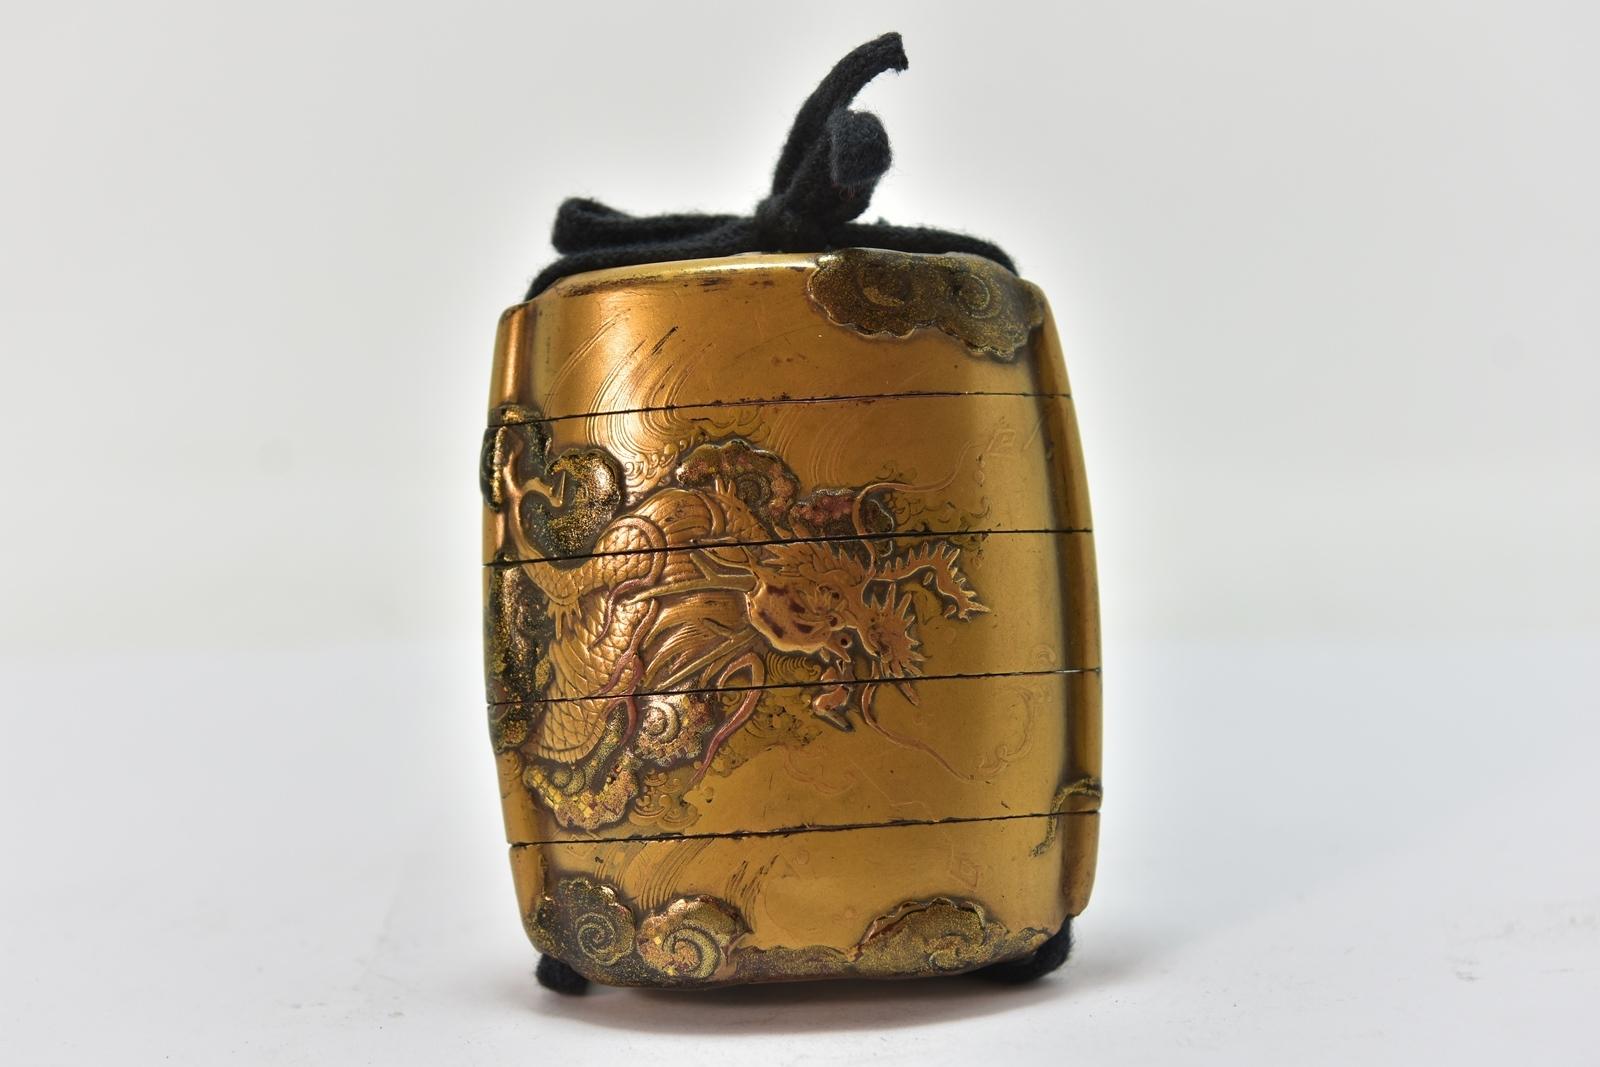 19th century Japanese inro with 4 boxes in gold lacquer with kinji mat background decorated in taka makiyé of gold of different tones. Lacquered wood size. Weight 47.5 gr. Dragon appearing in the middle of the clouds. 19th century period.